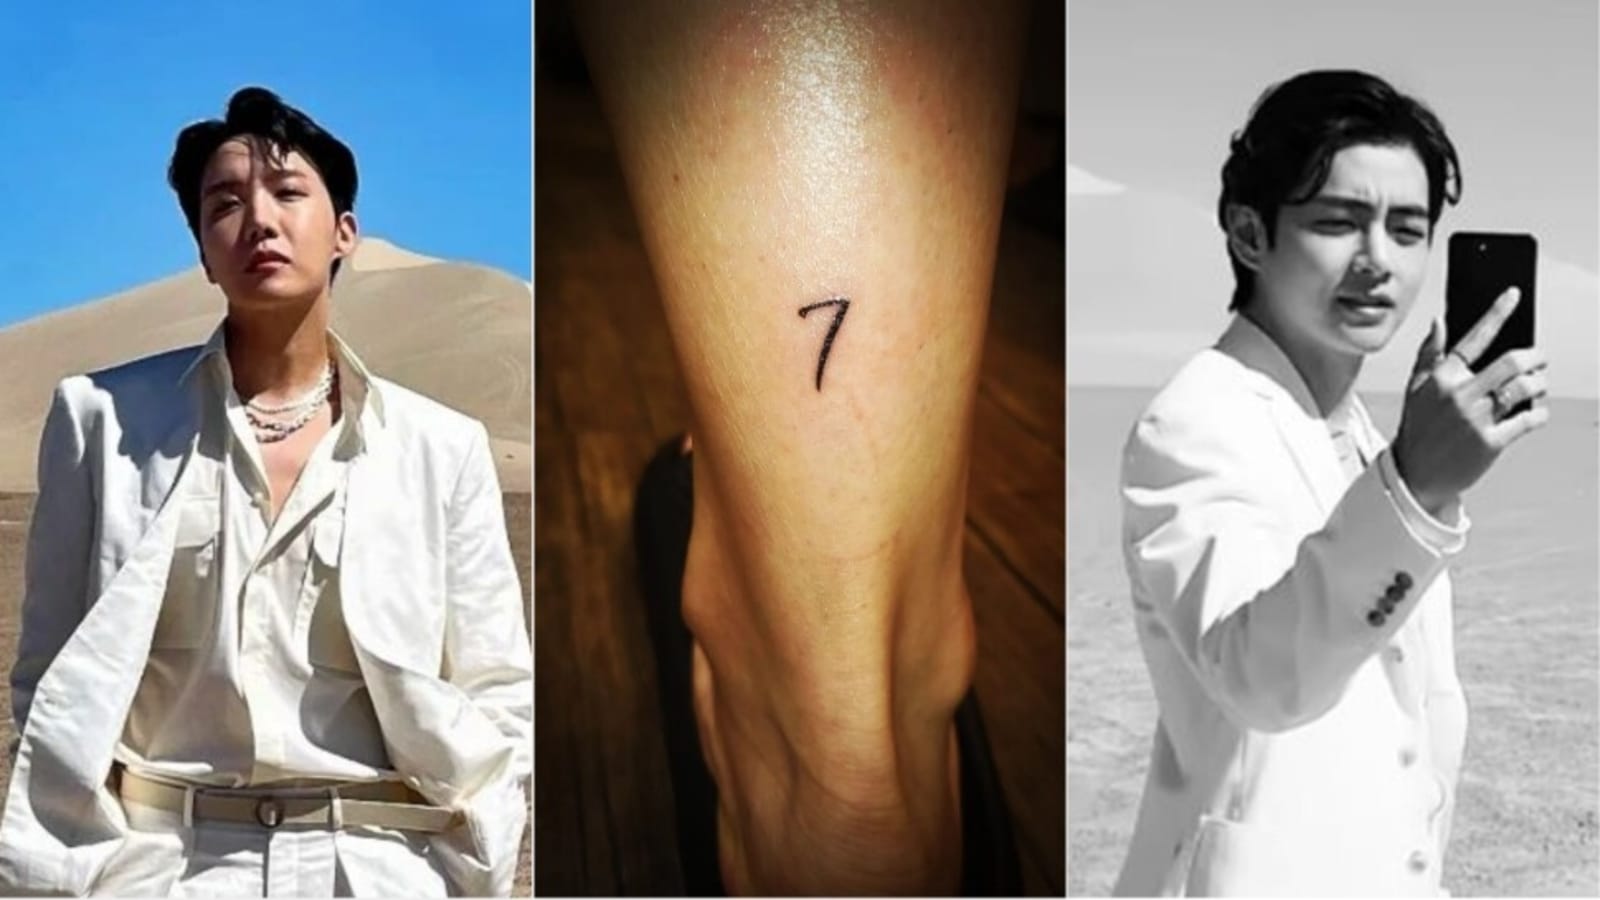 BTS: J-Hope reveals his '7' friendship tattoo day after group ...